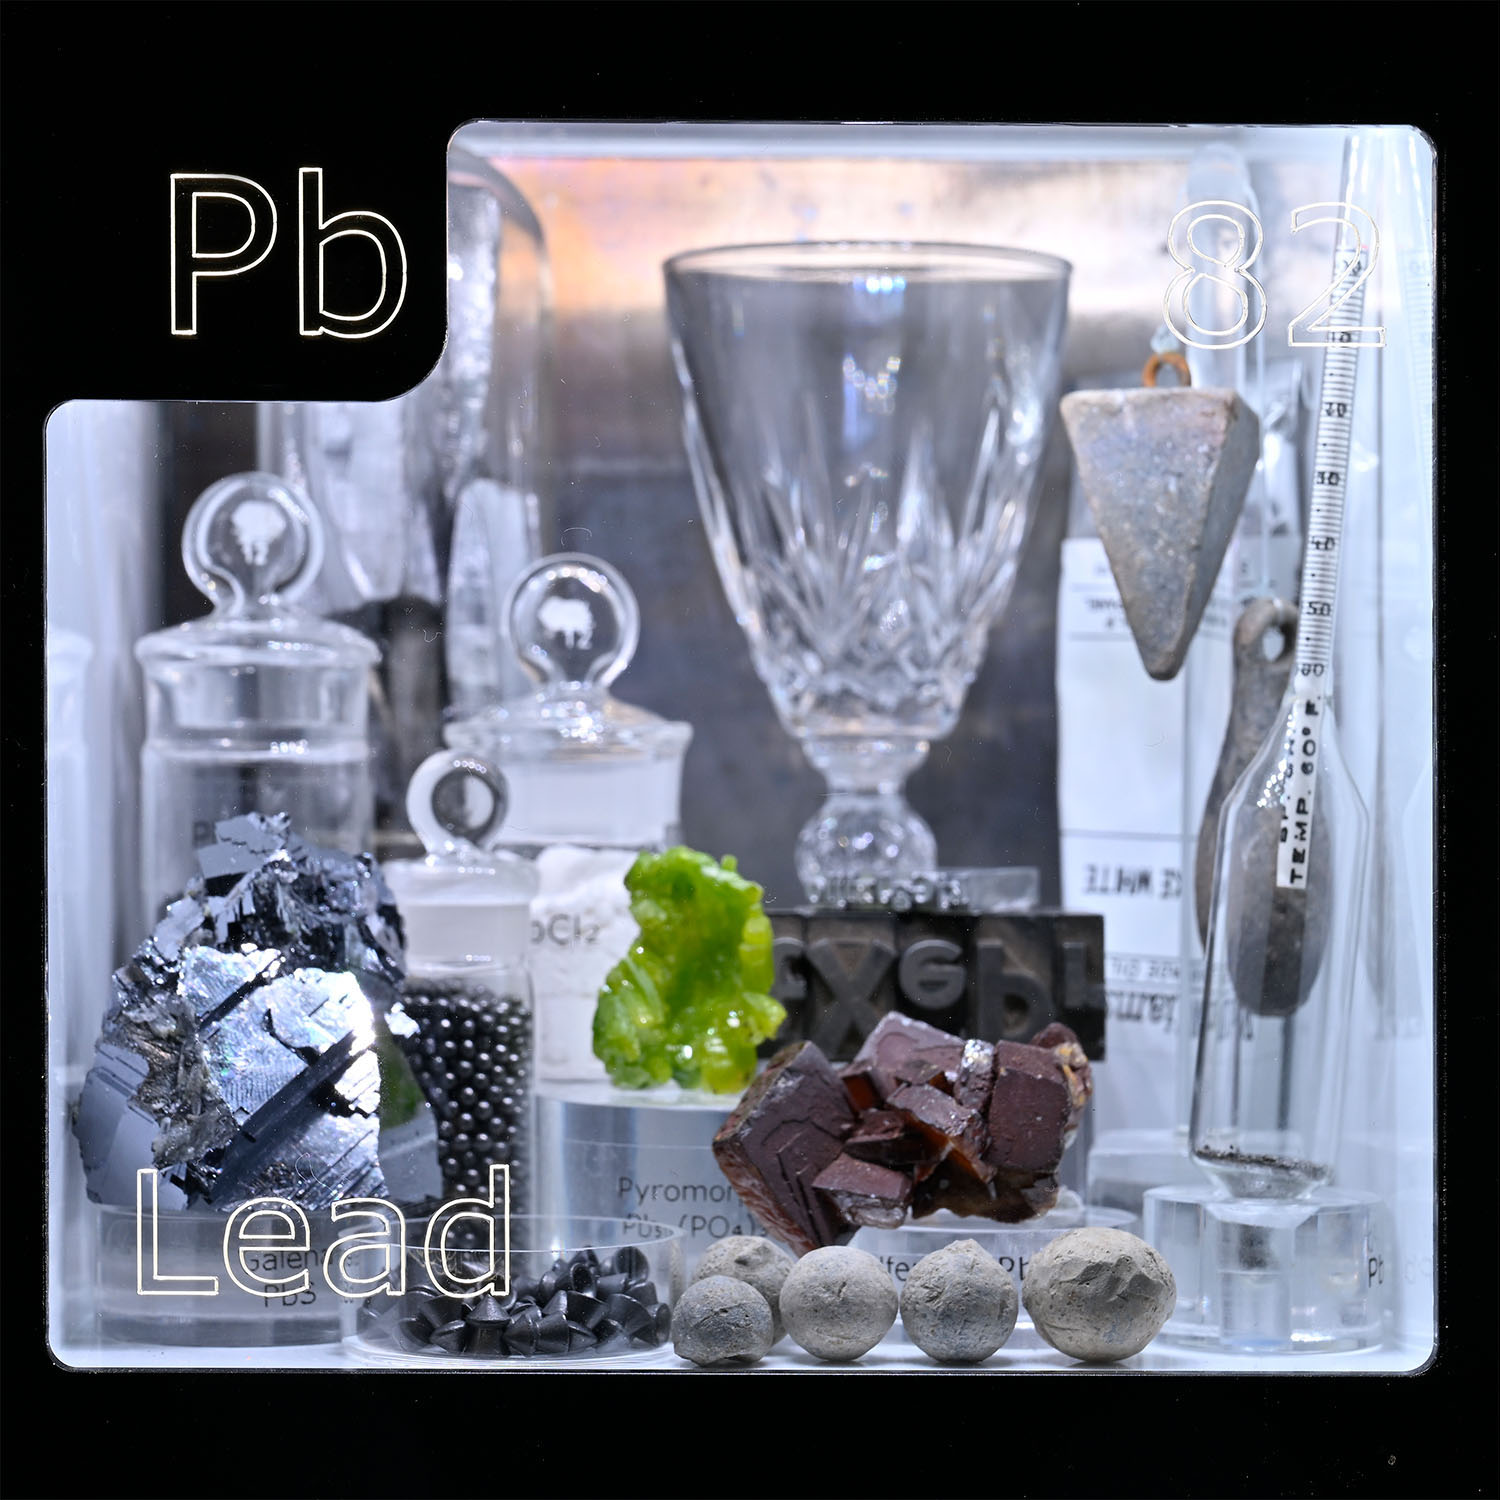 Periodic Table Display - close up of Lead and the items that contain that element